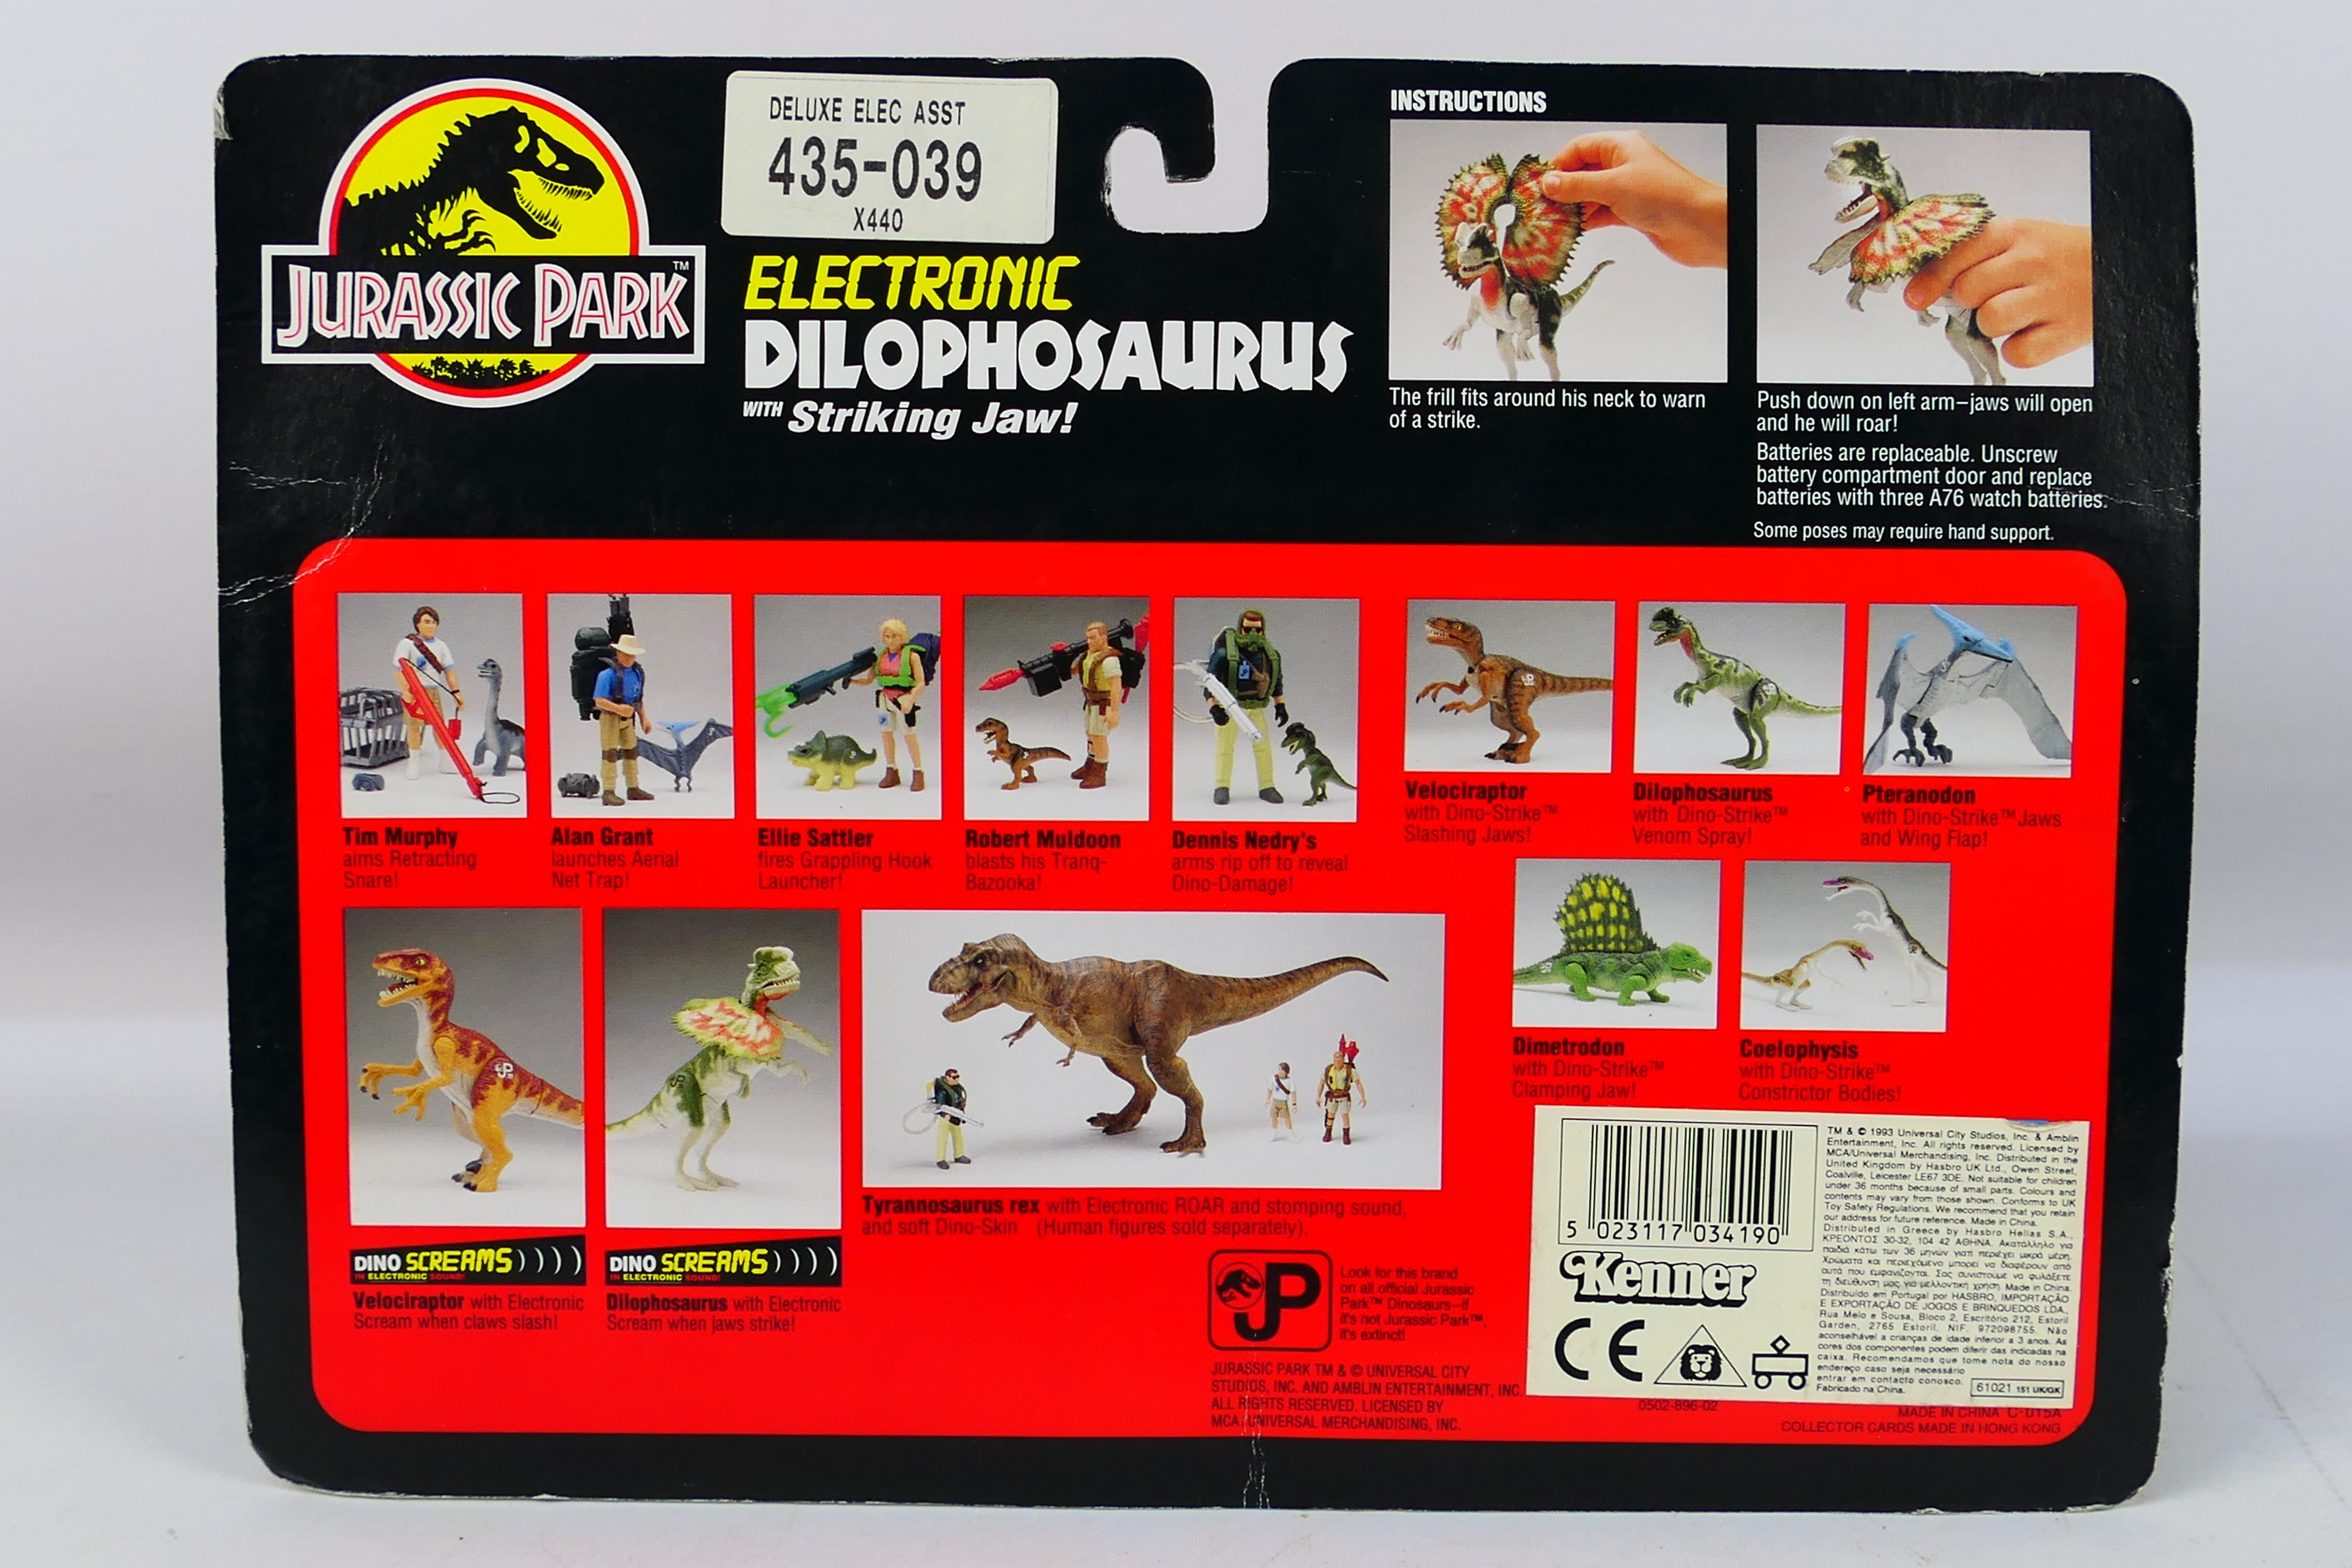 Kenner - Jurassic Park - A 1993 (Series 1) Blister packed figure of Electronic Dilophosaurus with - Image 5 of 6